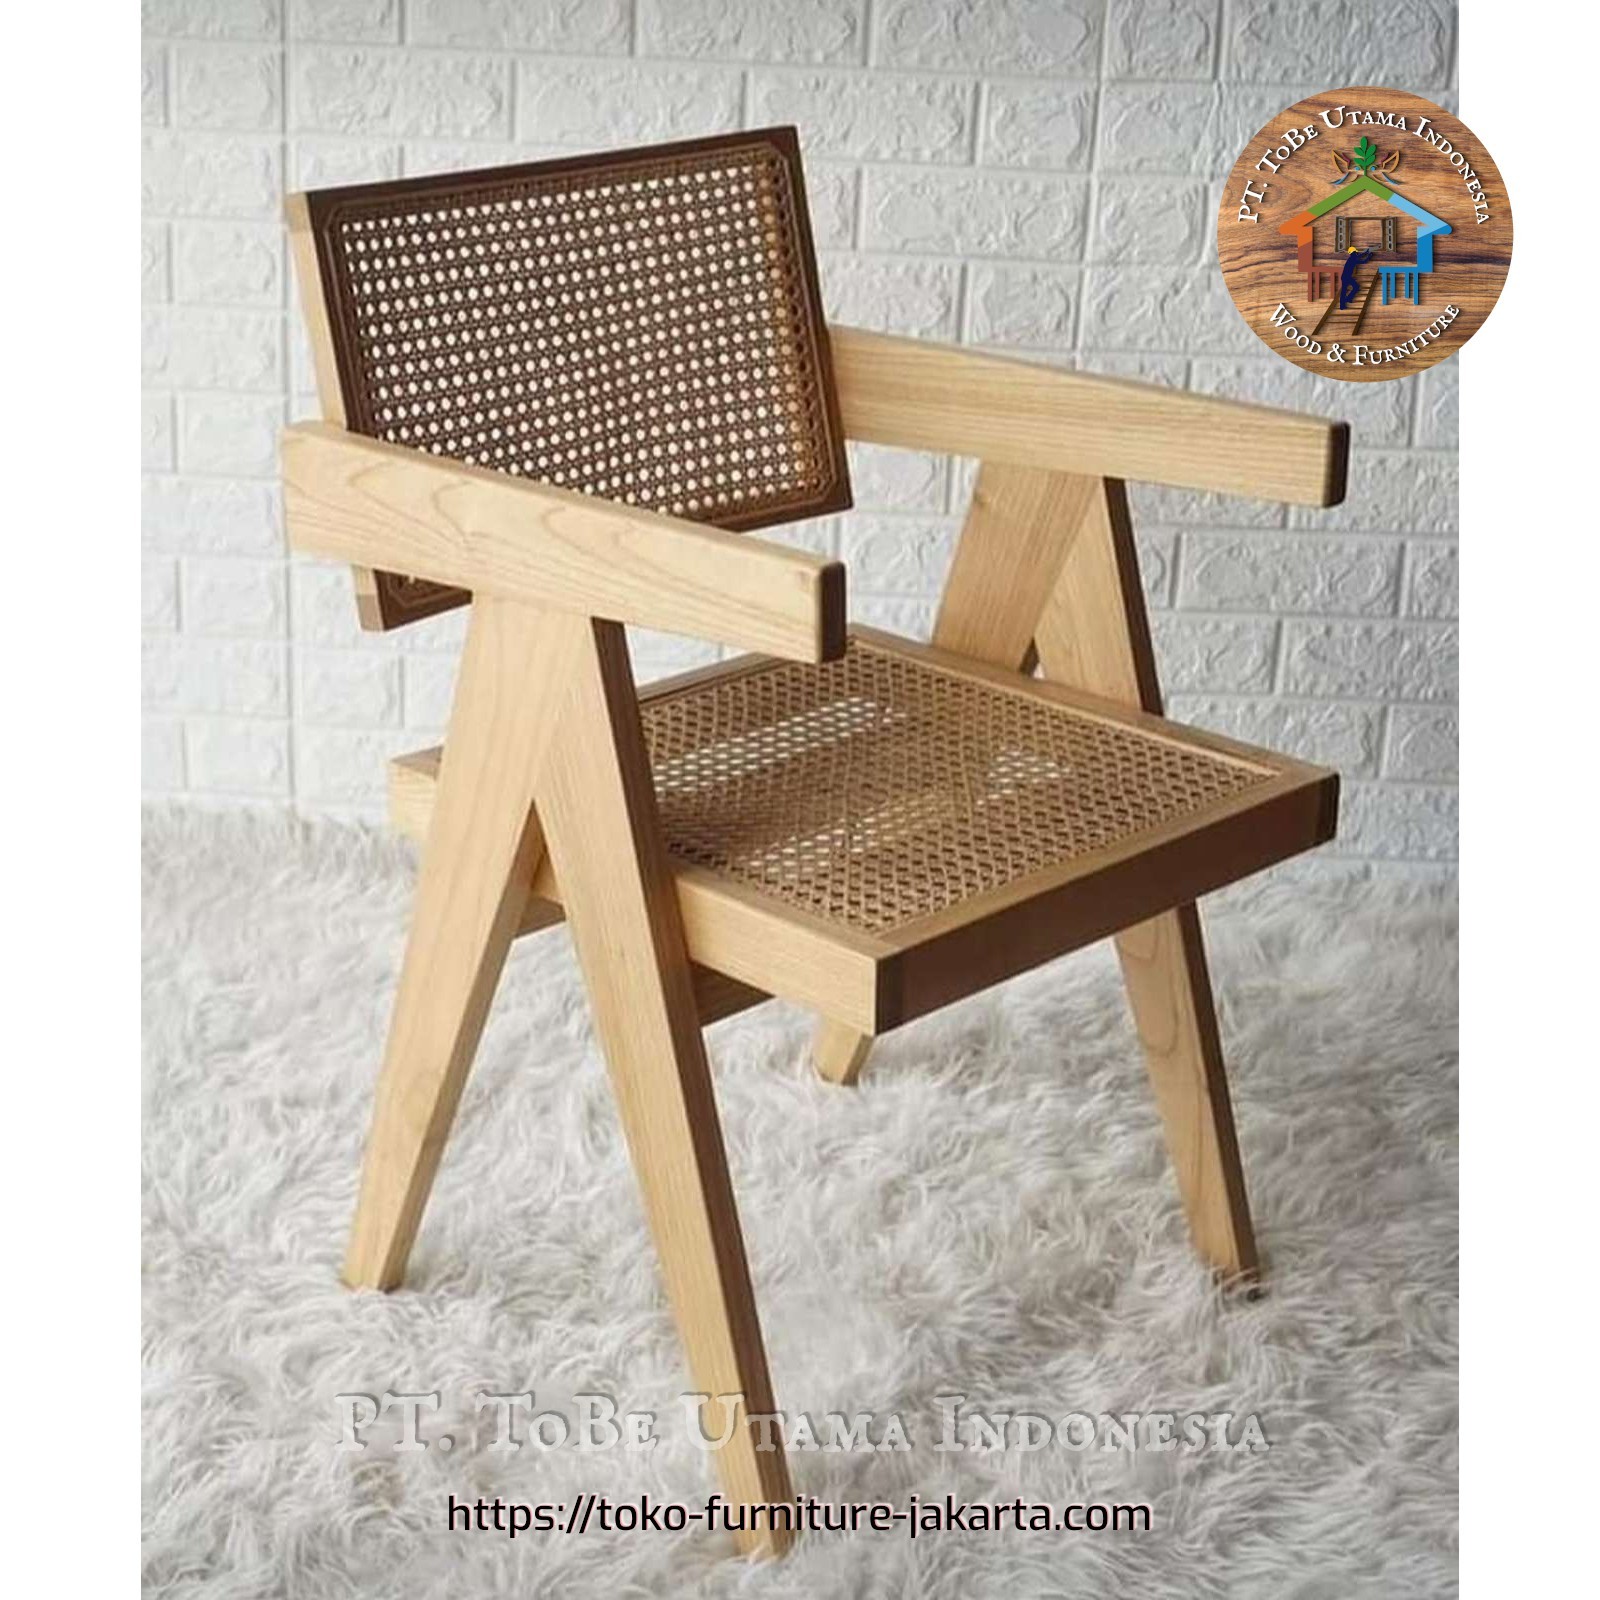 Living Room - Chairs: Rattan Chairs made of teakwood (image 1 of 9).